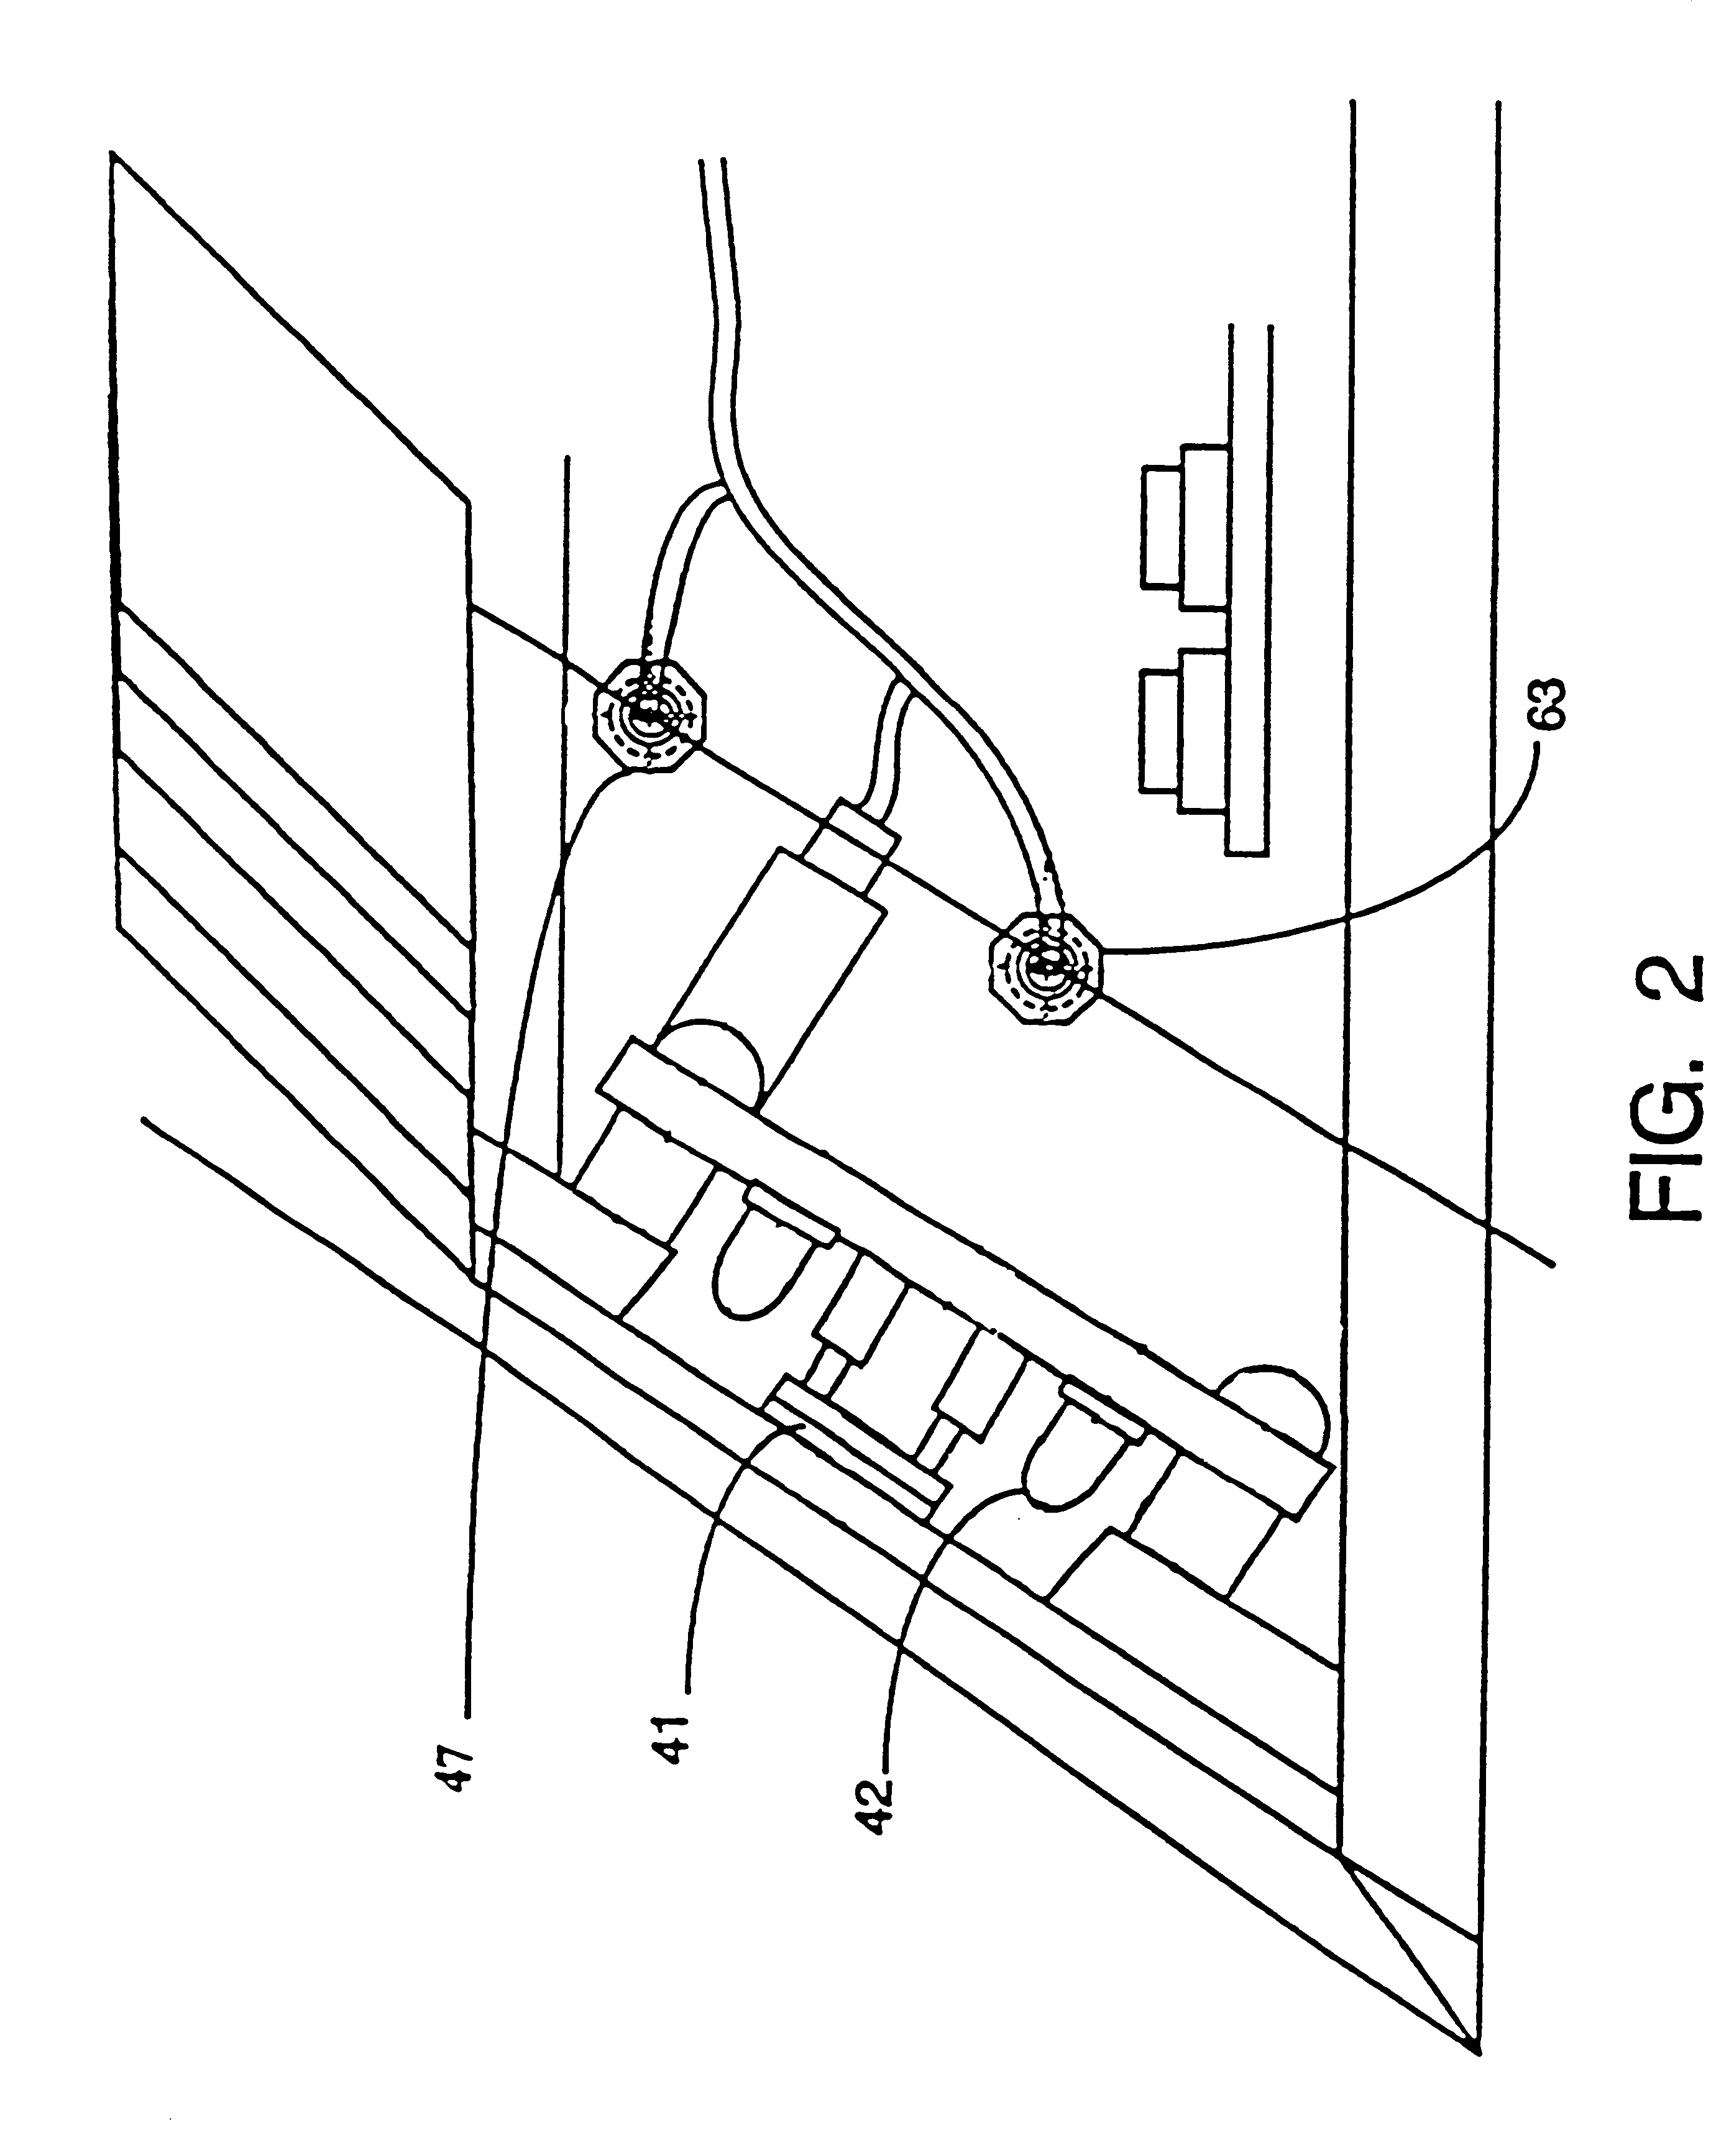 Card dispensing shoe with scanner apparatus, system and method therefor